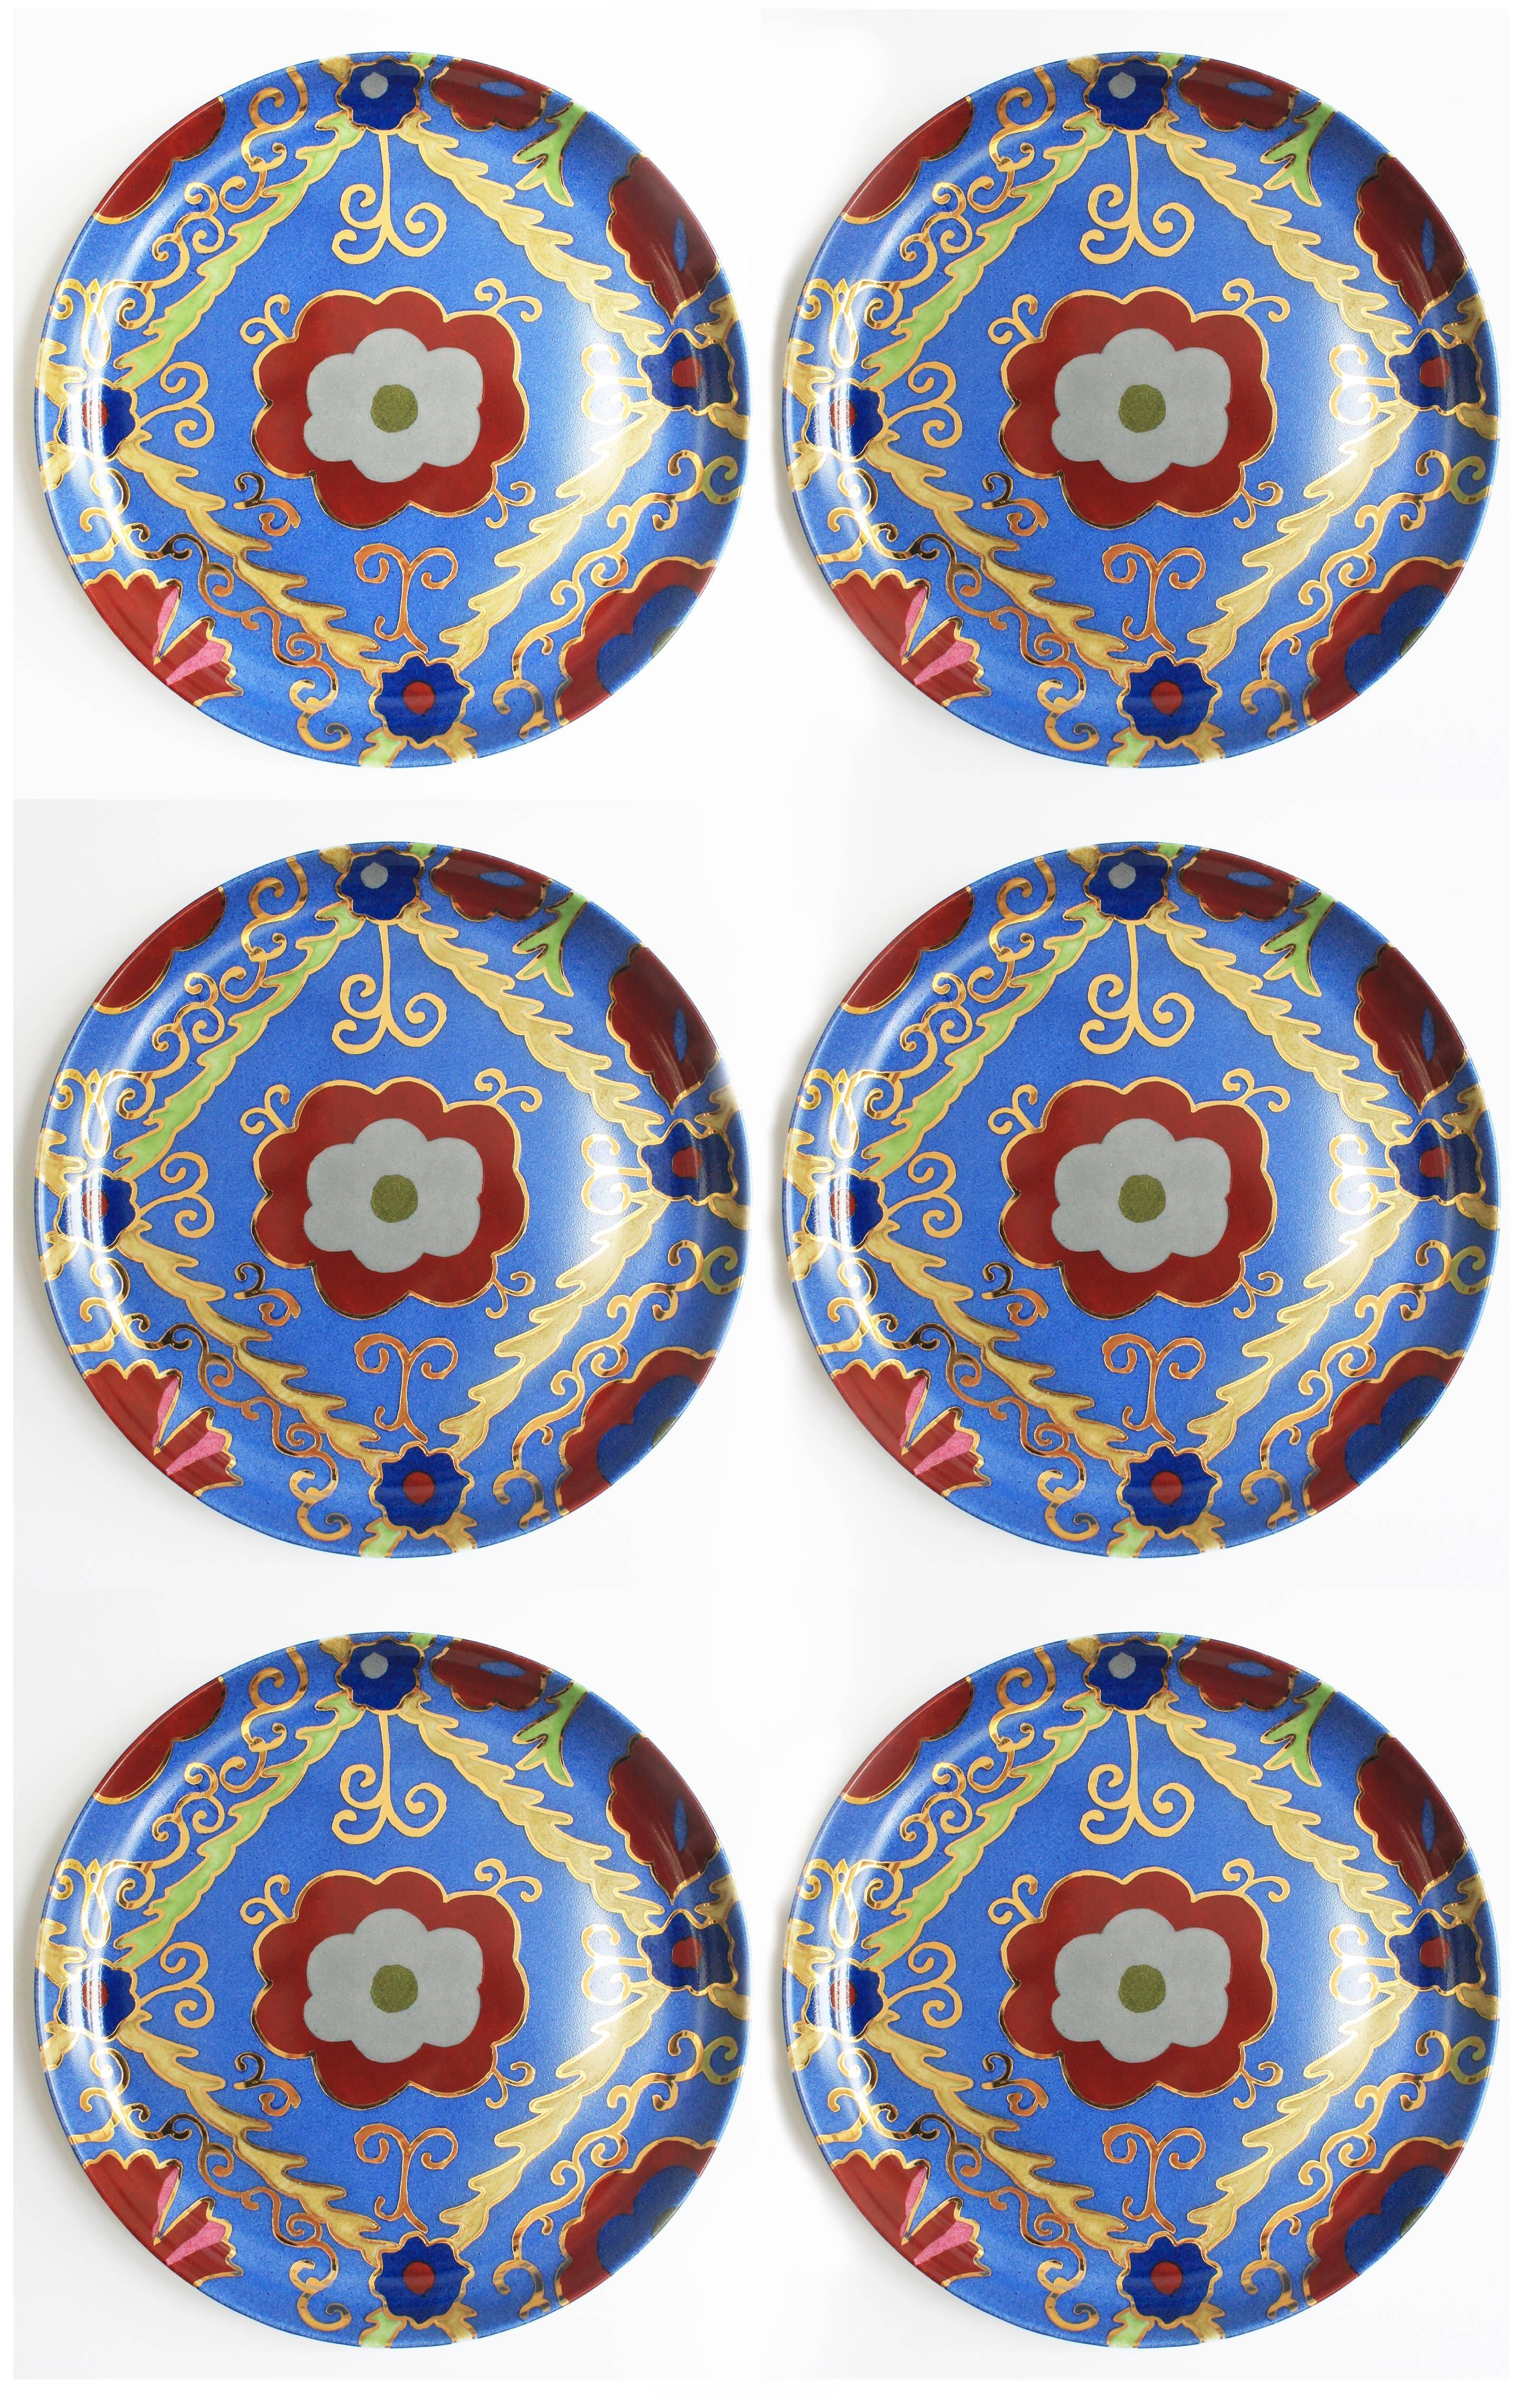 Set of hand-painted dinner and dessert plates with a beautiful Suzani motif by Arjumand's world by Idarica Gazzoni. The dinner plate is Egyptian red with gold, green and blue decoration. The dessert plate is indigo blue with red, green and gold